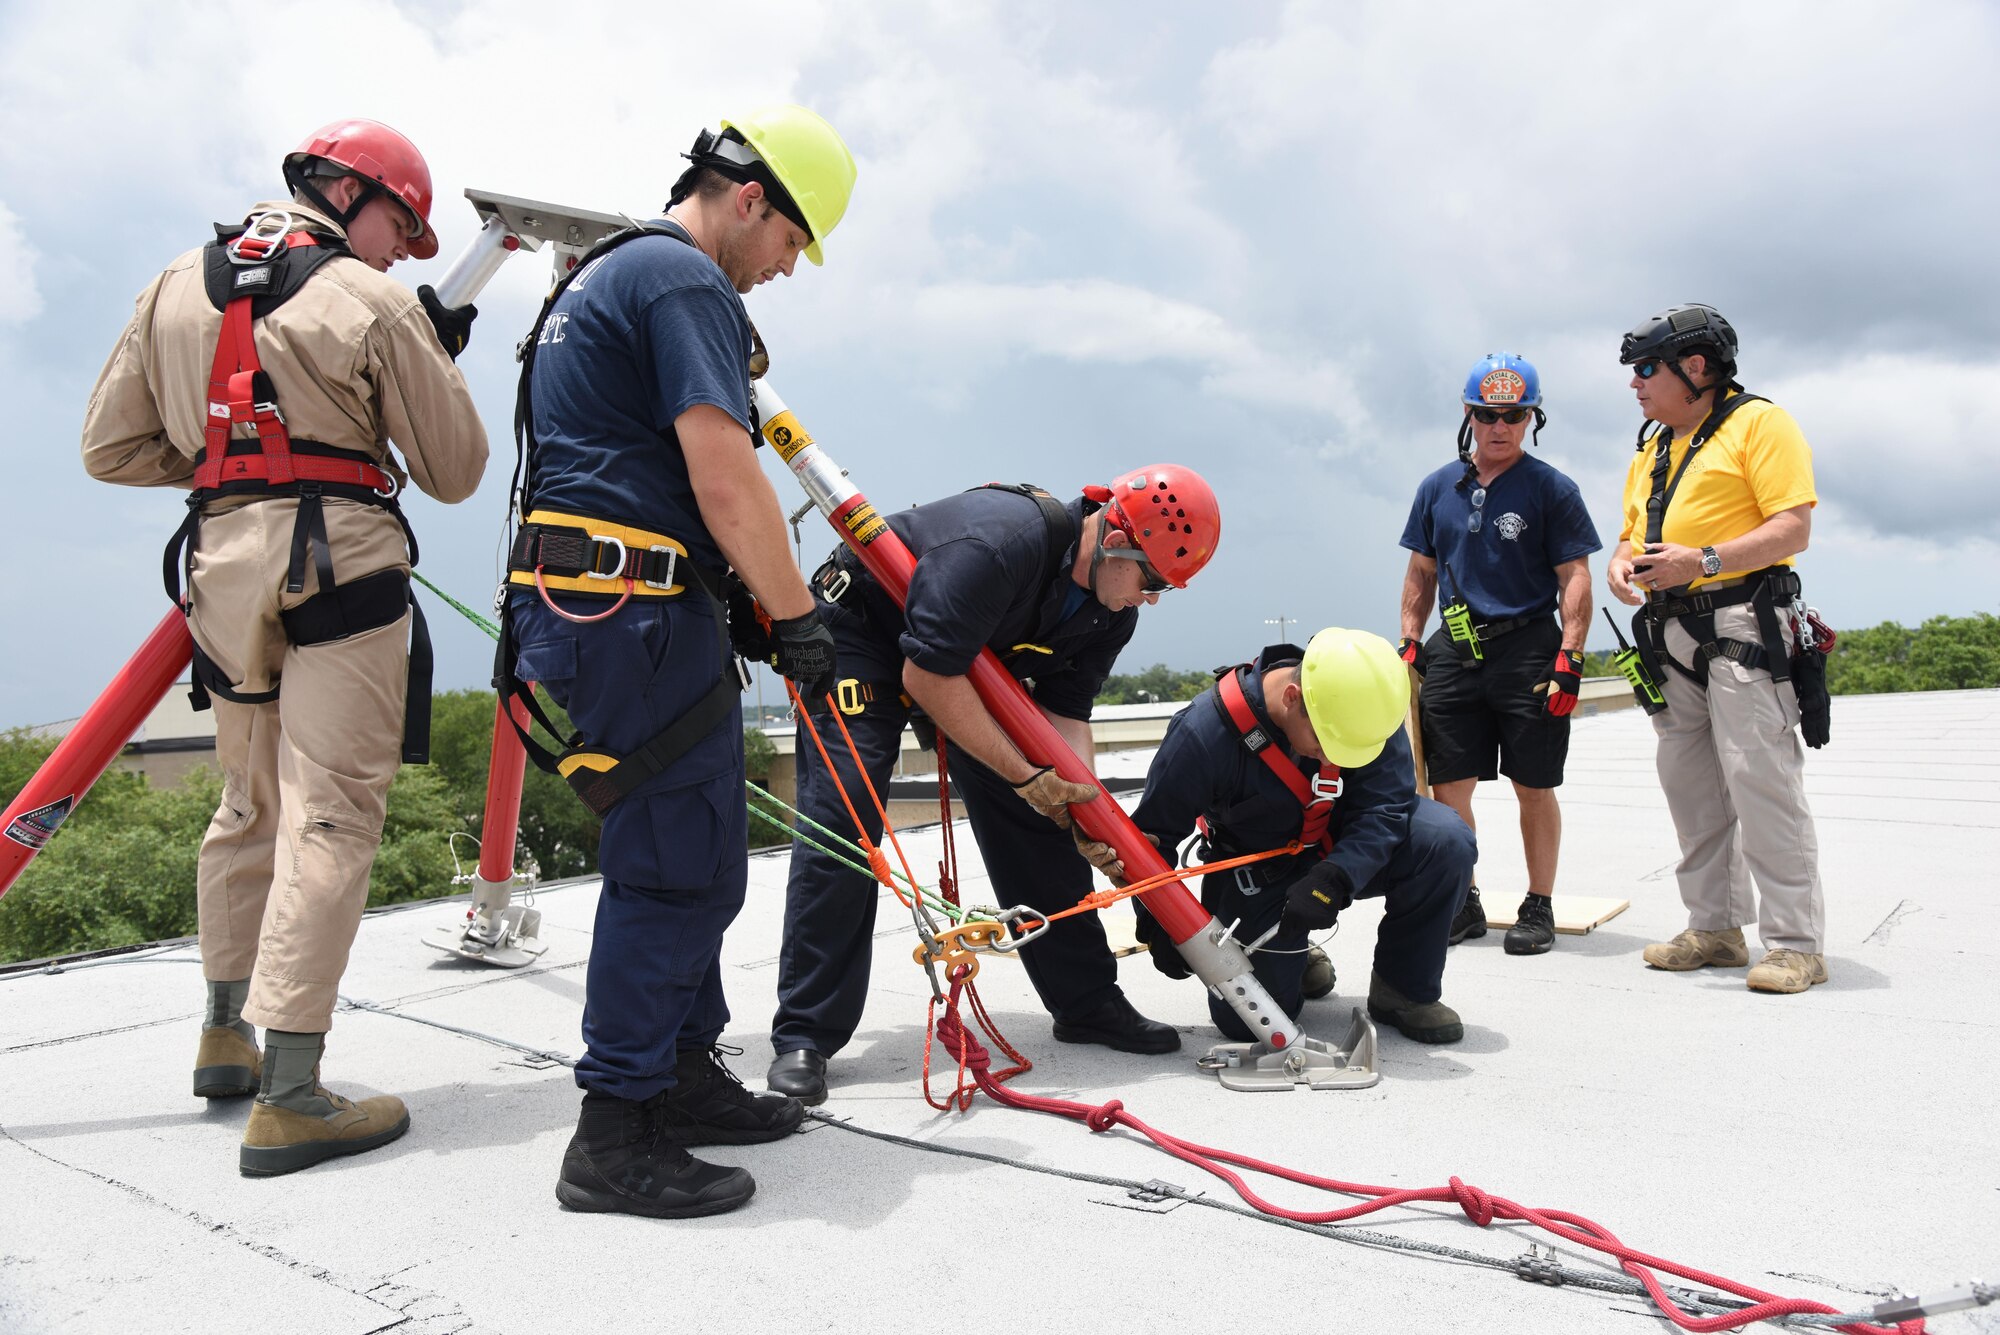 Members of the Keesler and Biloxi Fire Department, assemble a tripod atop of the Weather Training Complex during rope rescue operations training June 14, 2017, on Keesler Air Force Base, Miss. Keesler hosted the advanced rescue certification training course, which consisted of confined space rescue, high and low angle rescue and stokes basket rescue operations. (U.S. Air Force photo by Kemberly Groue)